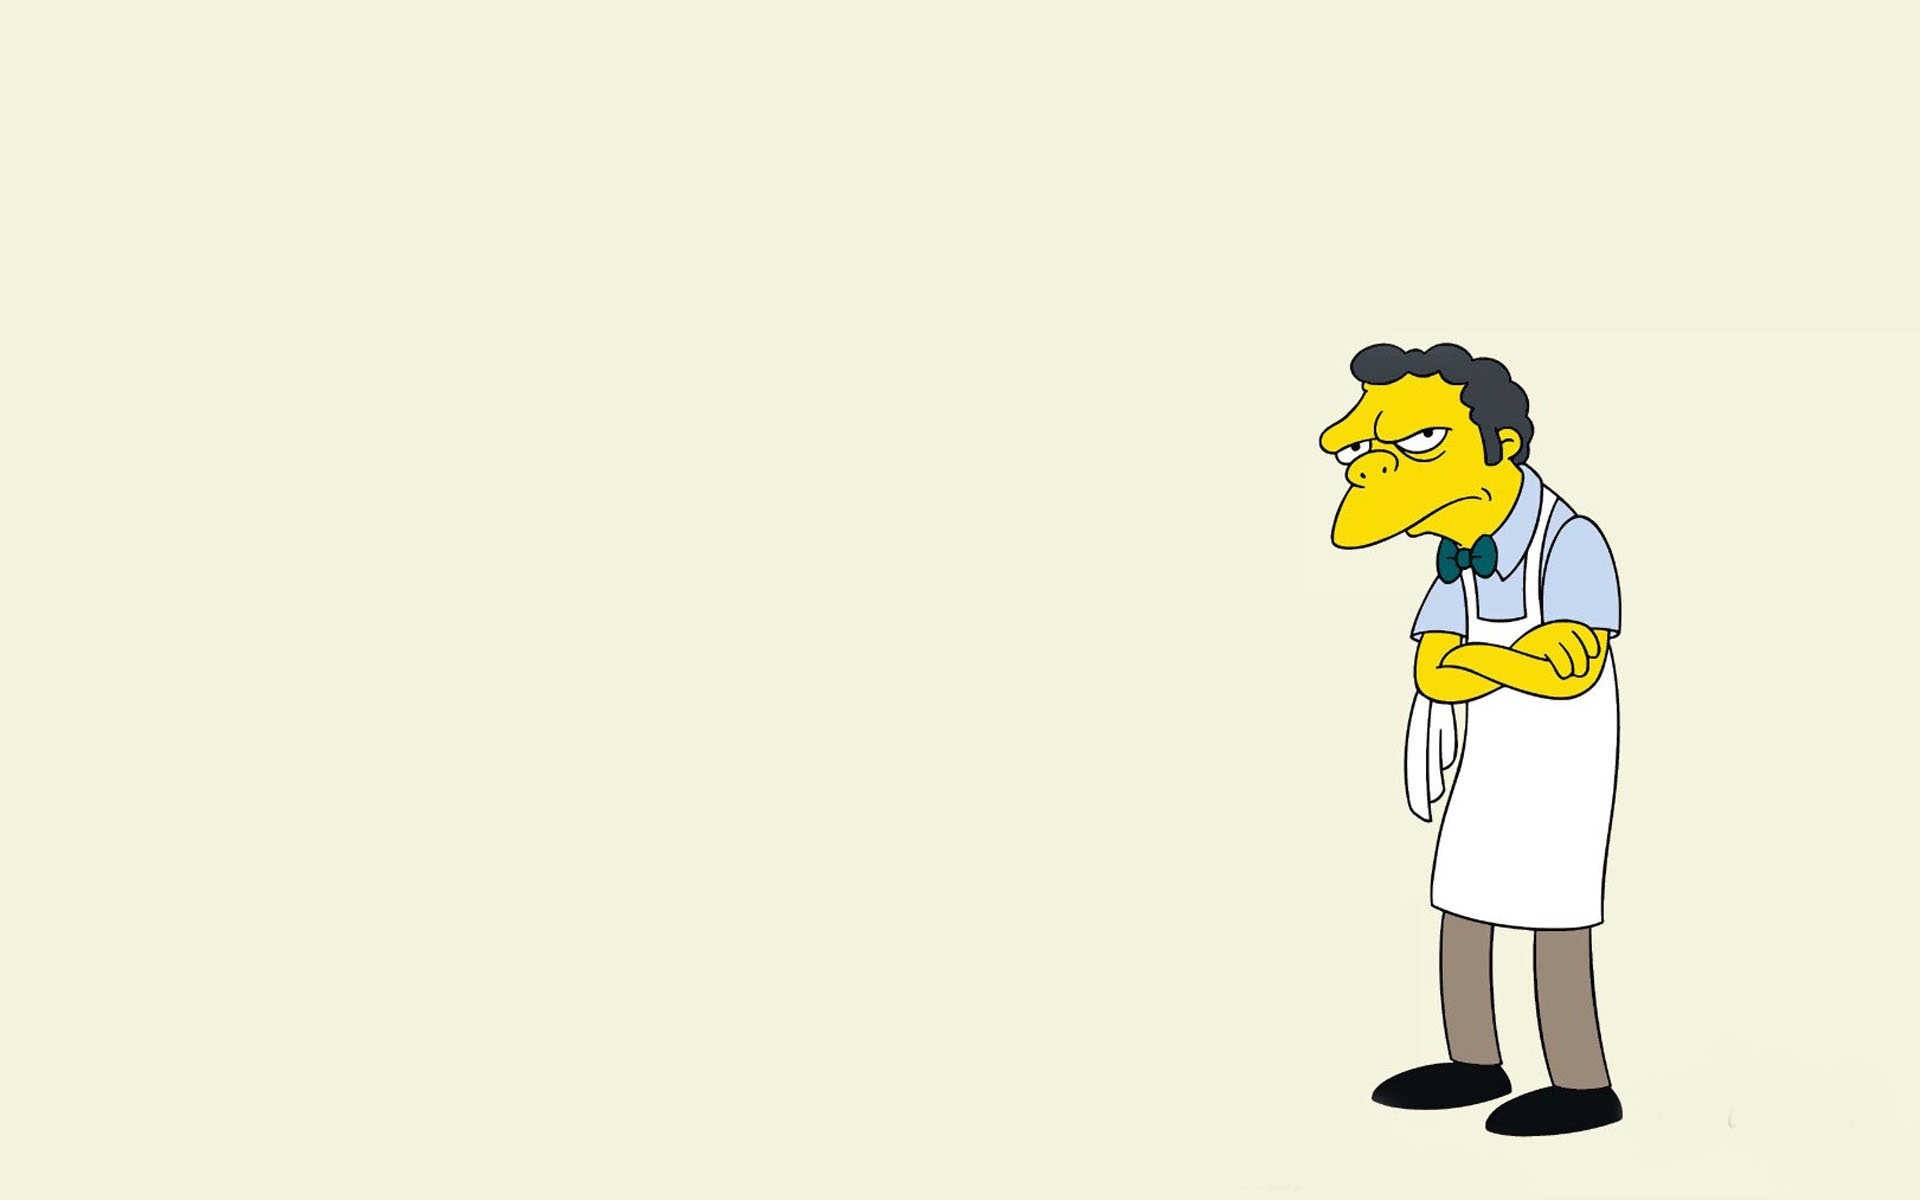 Simpsons Cartoon Design Free PPT For Your PowerPoint   Frame